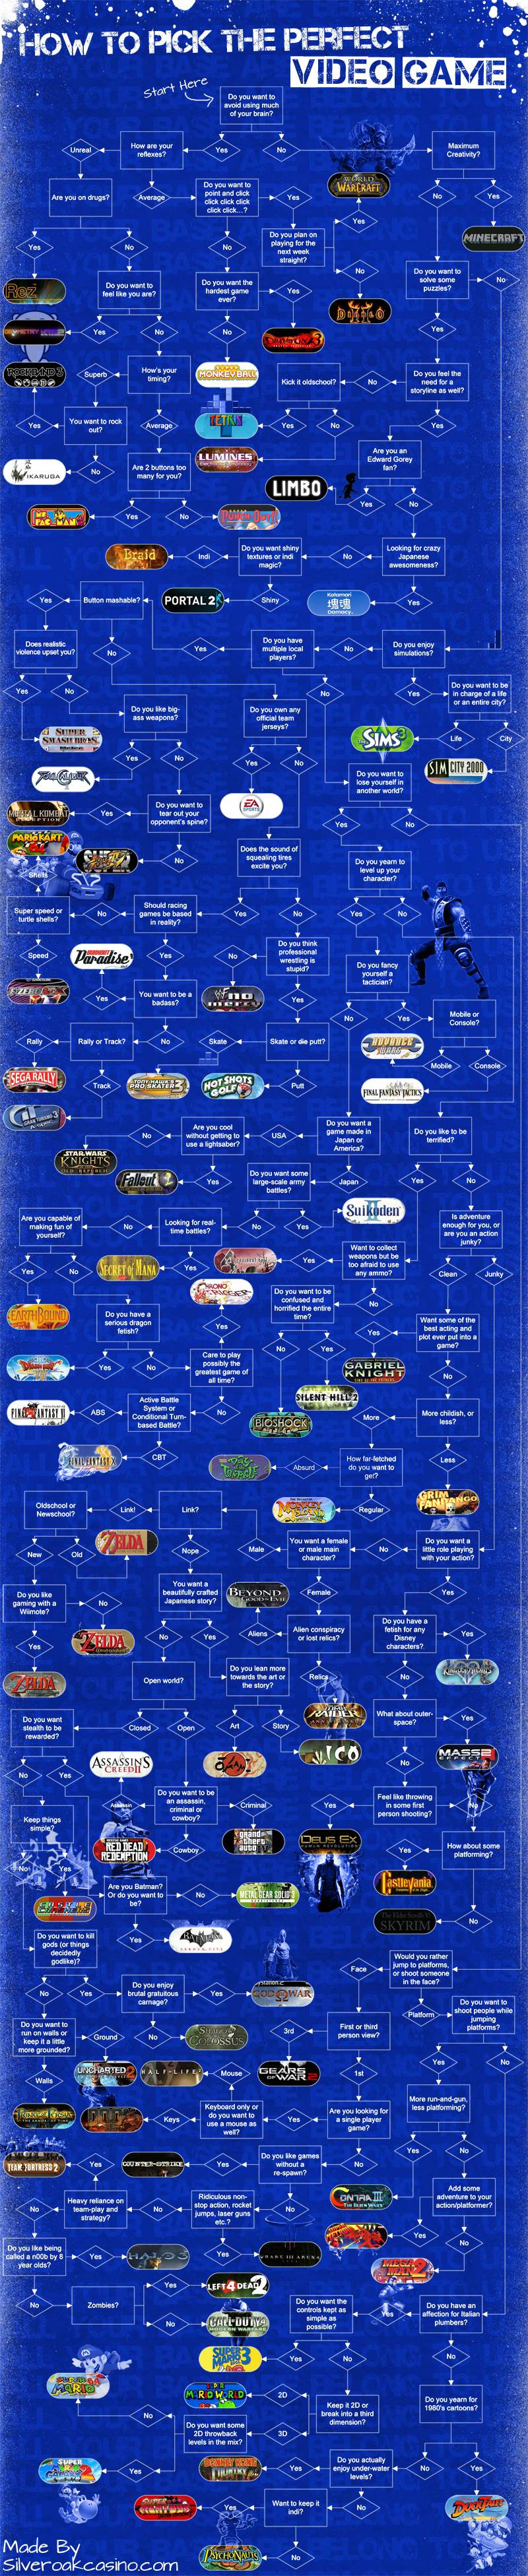 Conquer Your Video Game ‘Shame Pile’ With This Flowchart